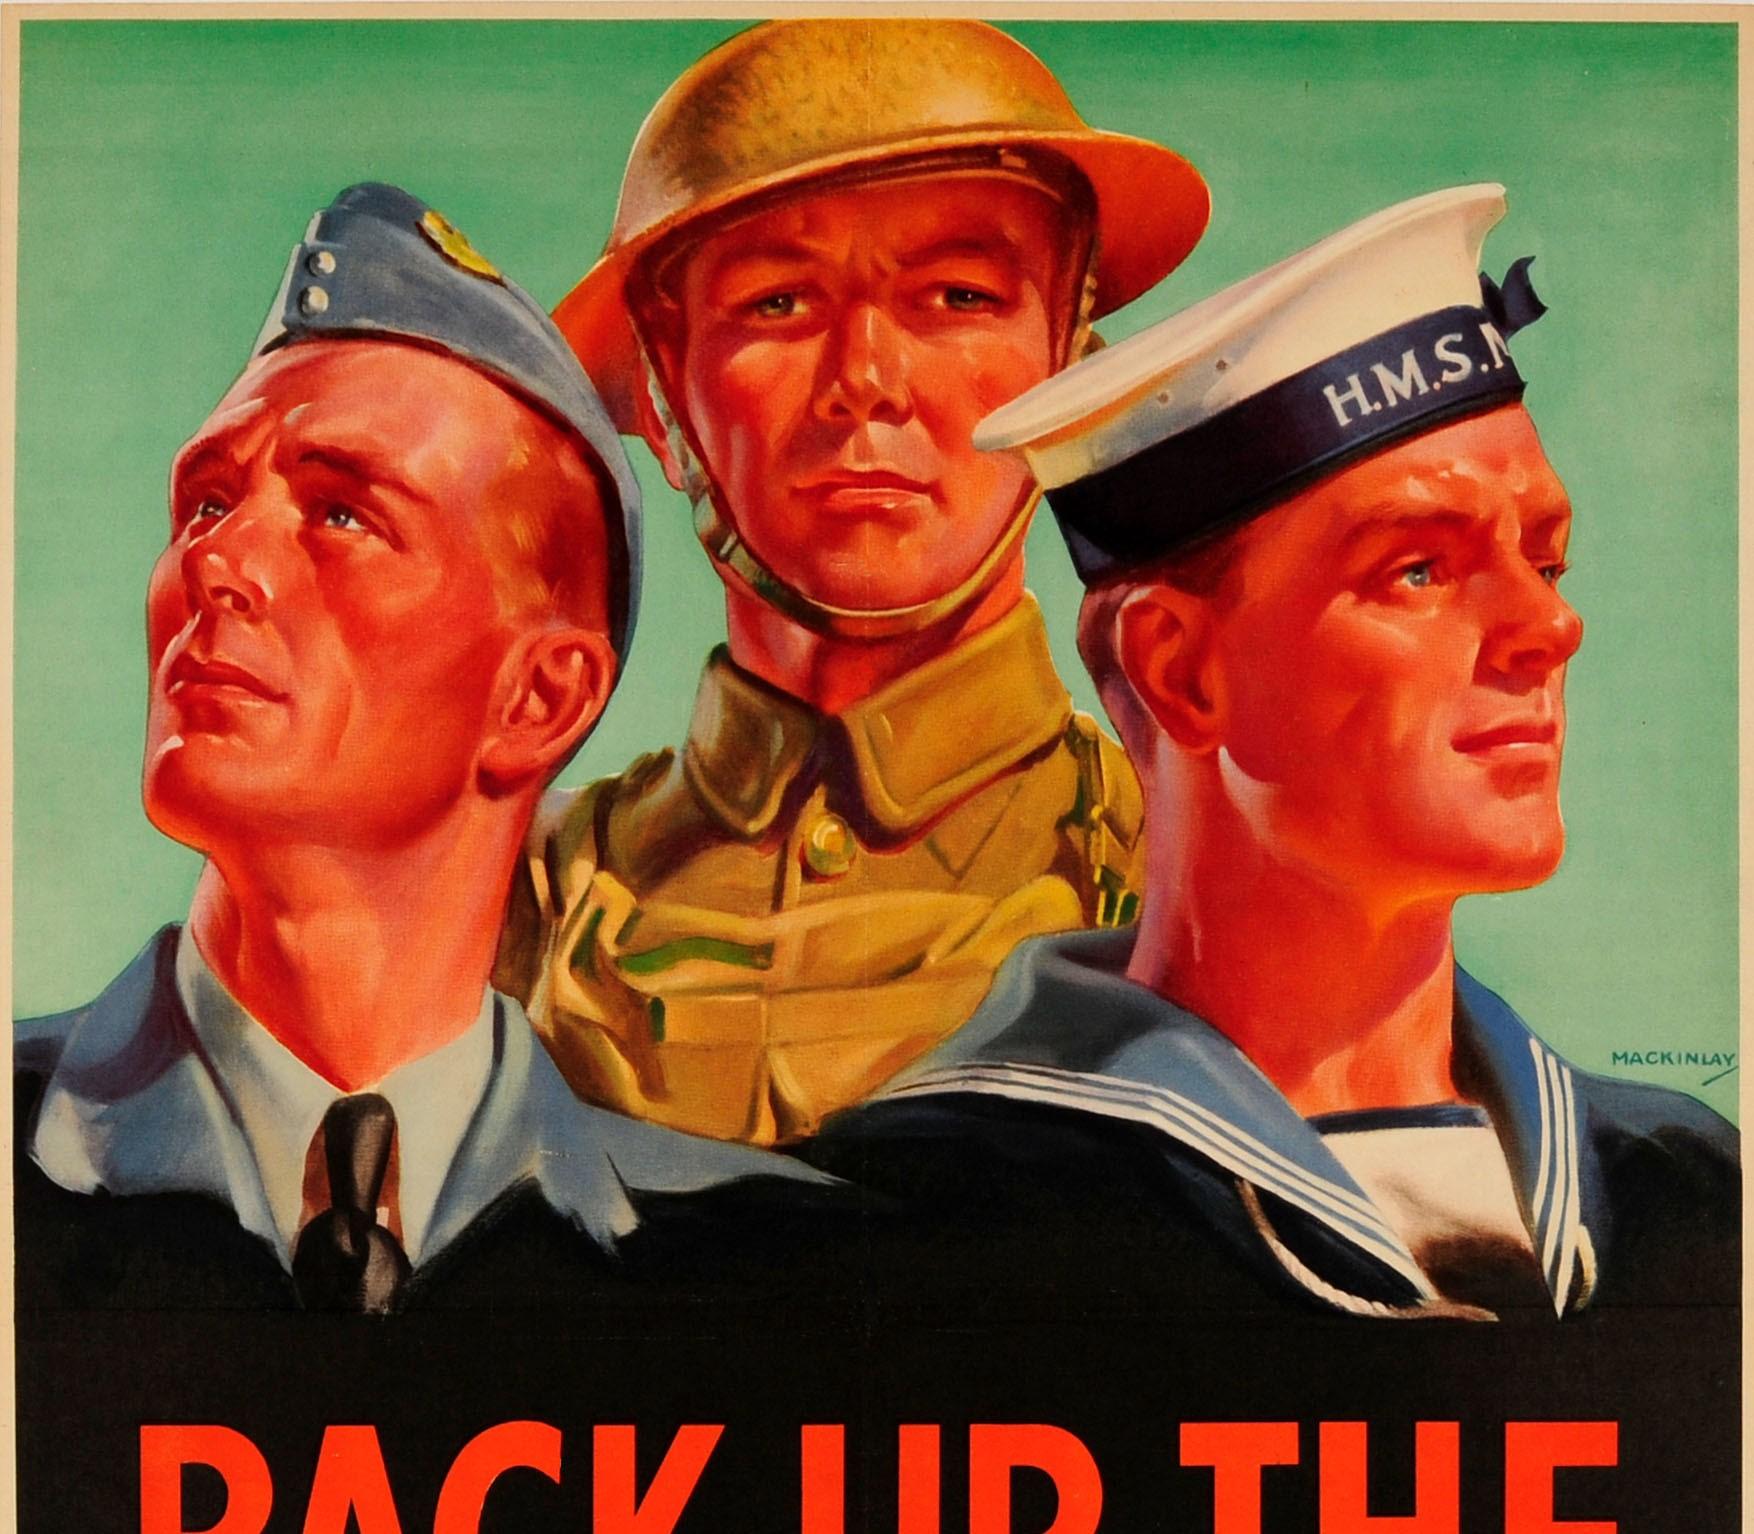 Original vintage World War Two poster - Back Up The Fighting Forces - featuring an image of three men in military uniform from the Royal Air Force RAF, British Army and Royal Navy against a green background with the title text in bold red lettering